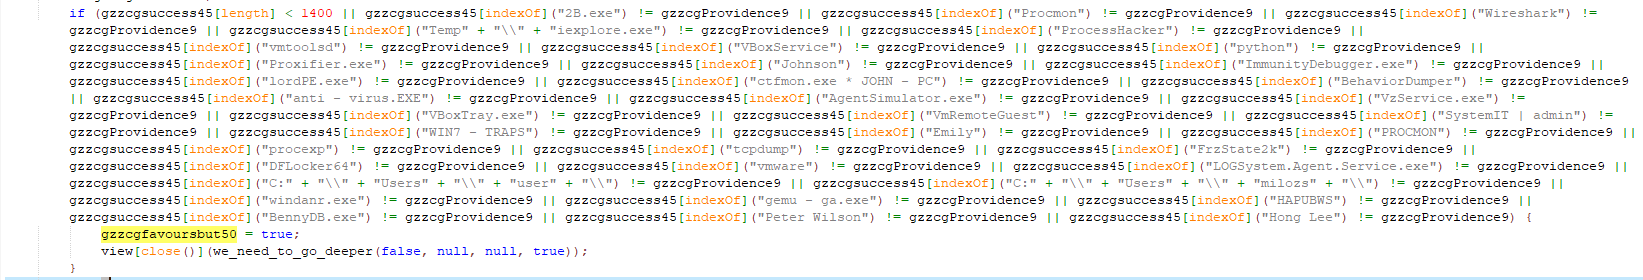 Figure 5. A snippet of checked processes and usernames